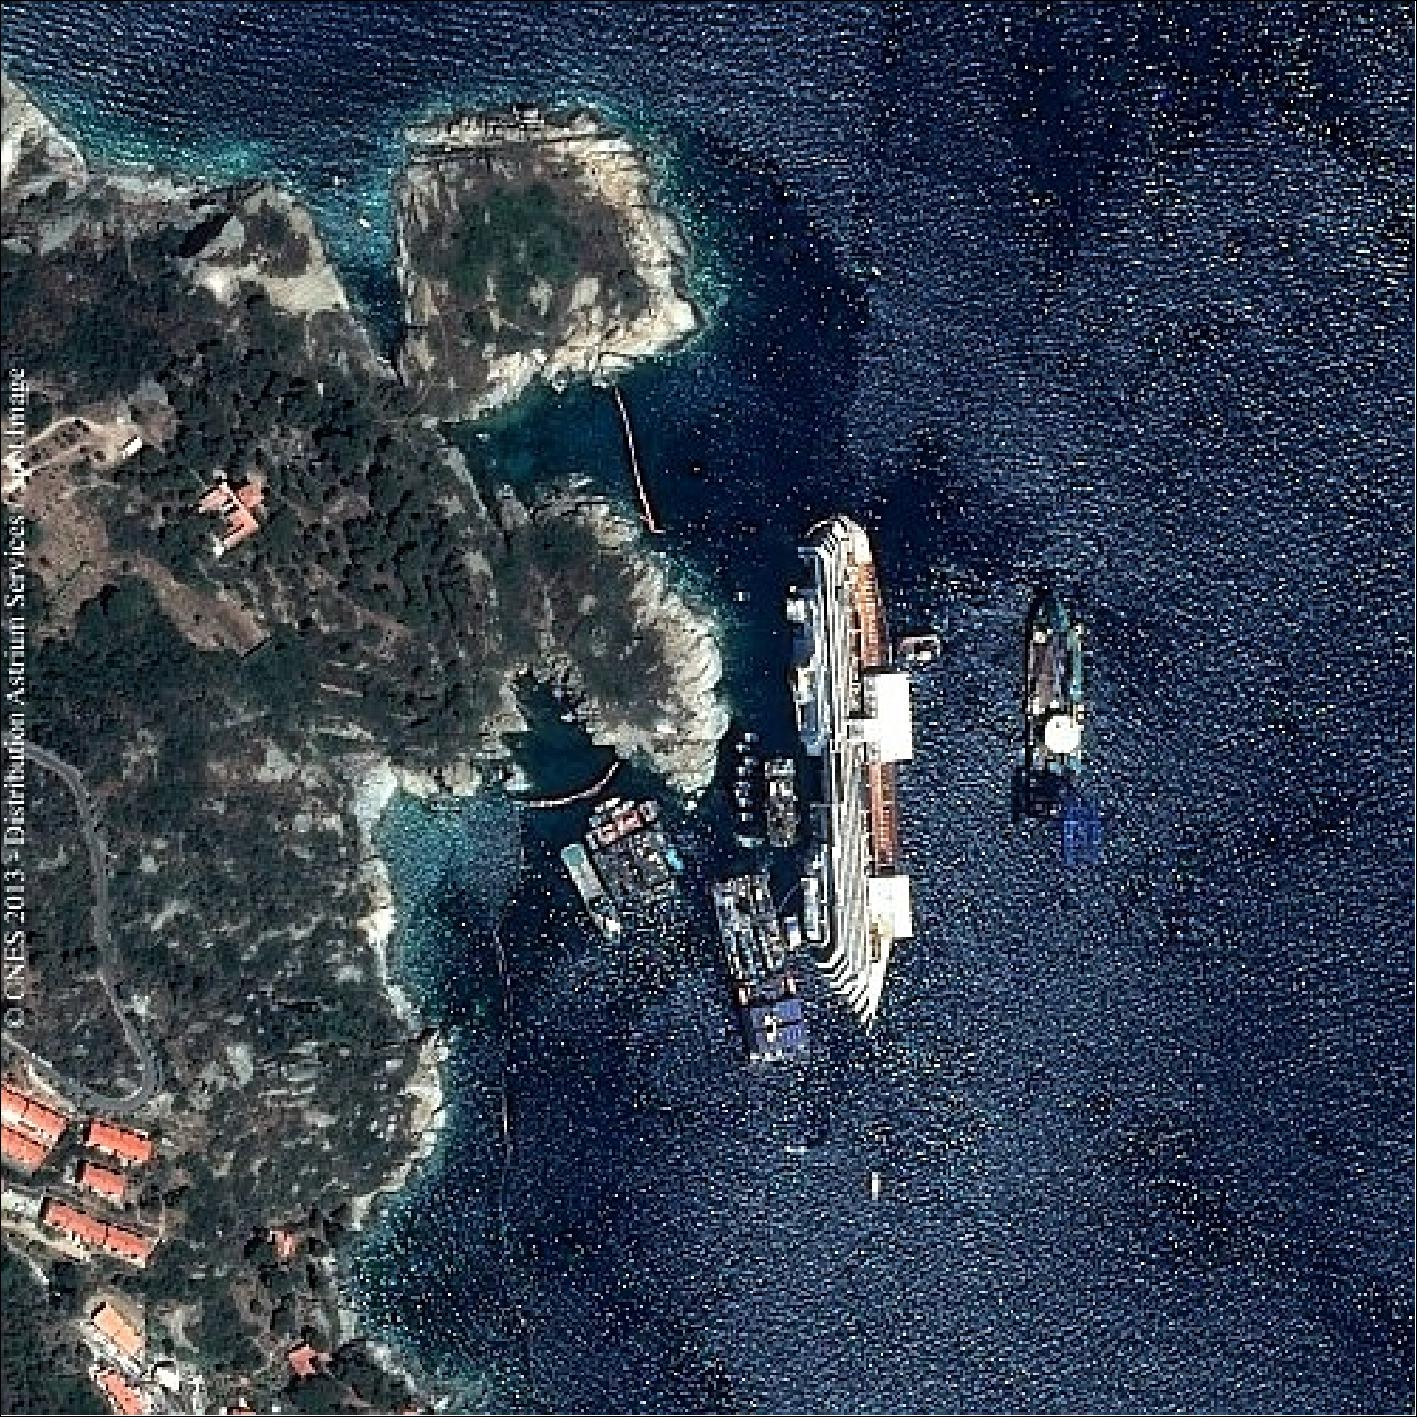 Figure 29: Pleiades image acquired on July 12, 2013 showing the wrecked Costa Concordia off the coast of Giglio, Italy. (image credit: CNES Distribution Astrium/SPOT Image)